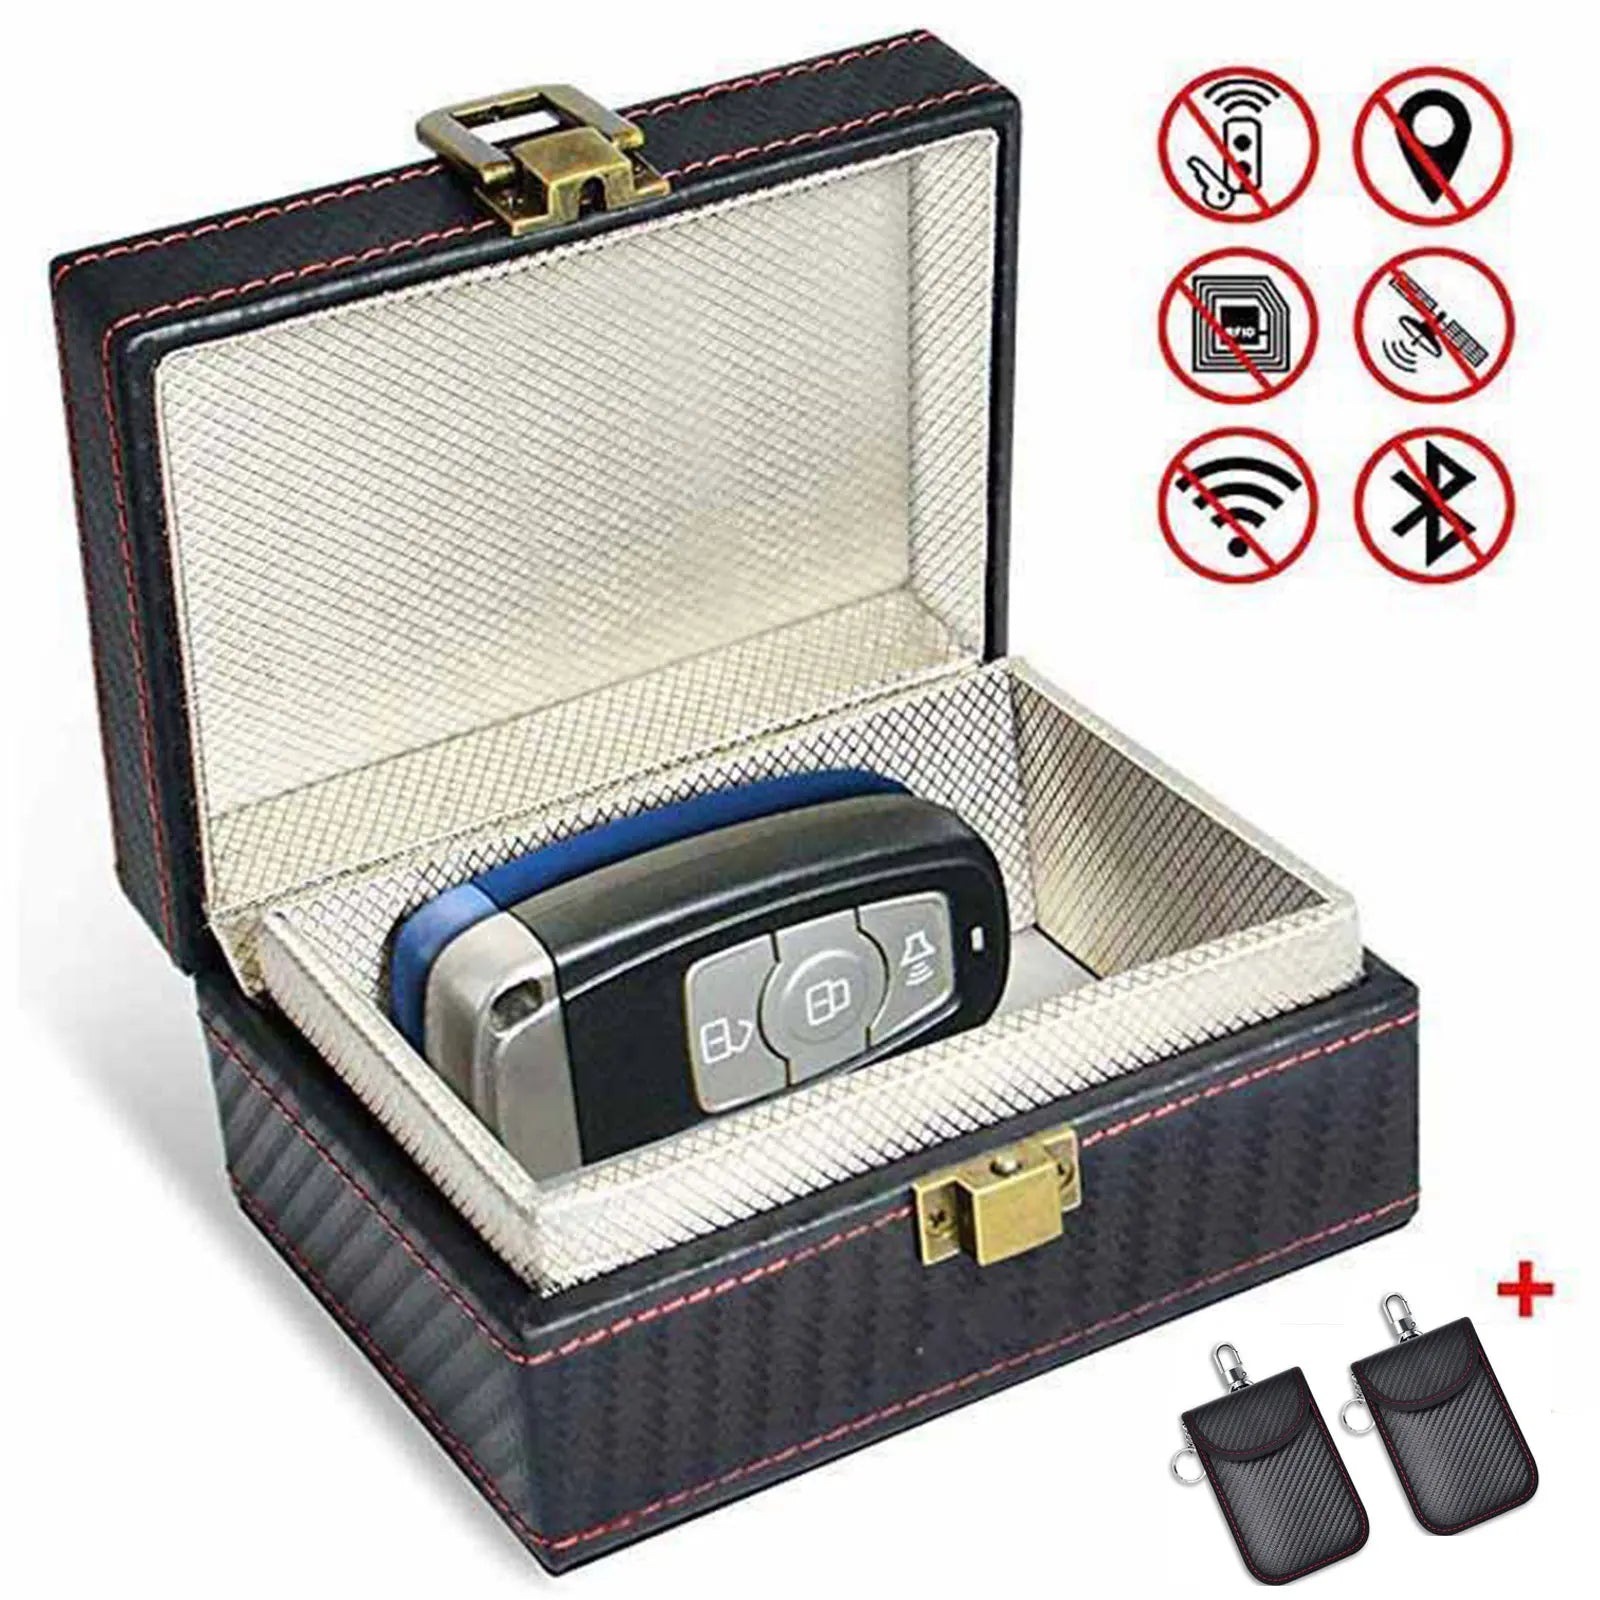 TimelyTrust Luxury Faraday Box & Pouch Set: Ultimate Car Key and RFID Security